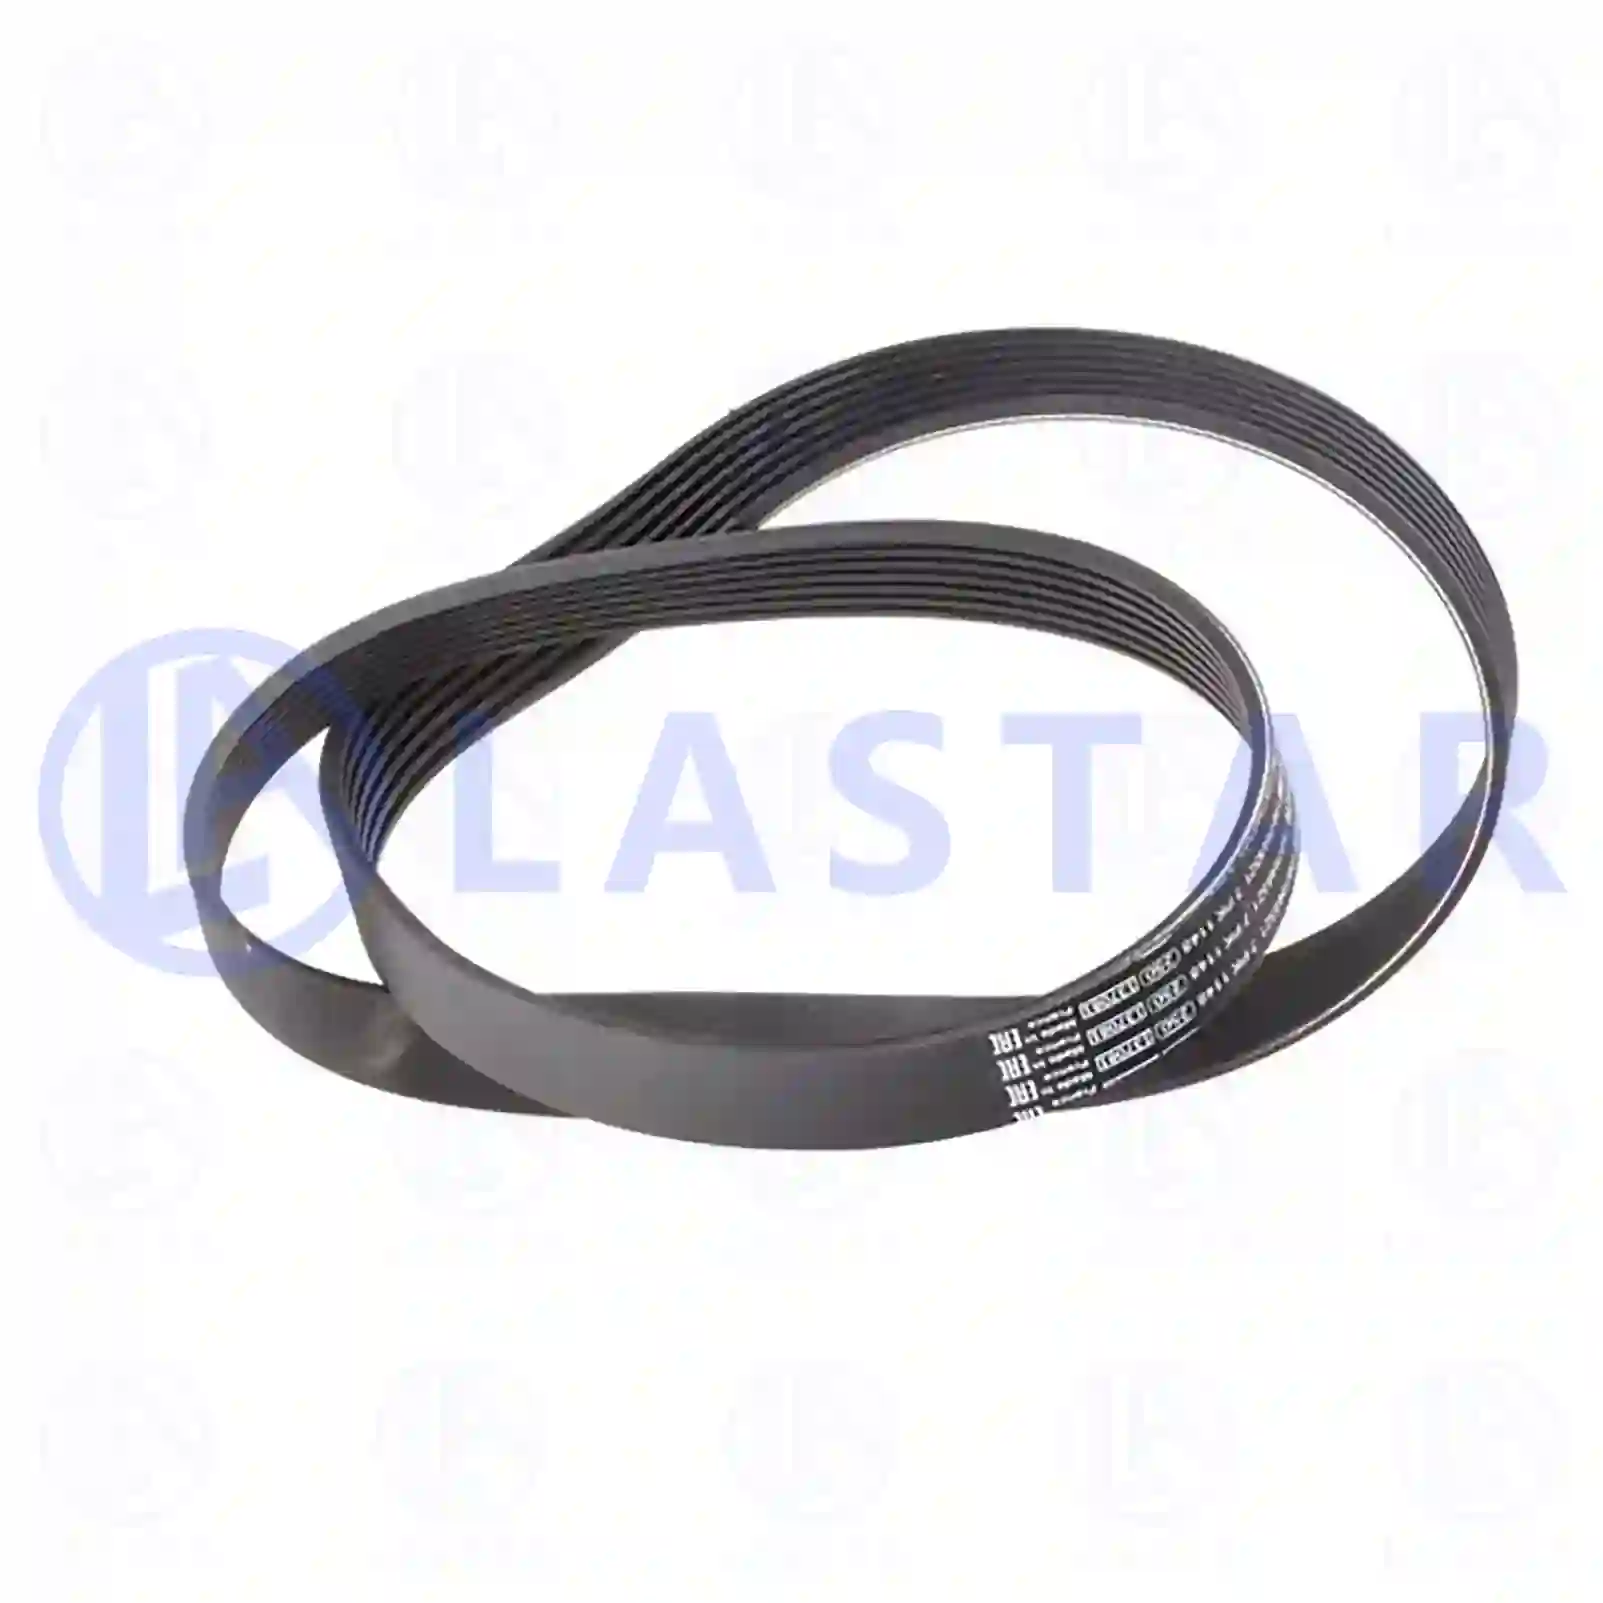 Multiribbed belt, 77707787, 60653029, 60676136, 71732386, 030145933AT, 030145933R, 03L903137, 03L903137G, 03L903137T, 30145933AT, WHT003848, 11281715713, 11287838200, 4792071, 4792071AB, 1611204980, 575099, 9675874480, 9805463680, 4792071, 60653029, 60676136, 71732386, 9615208280, 96152082, 07766685, 46414859, 60676136, 71732386, 9615208280, 96152082, 0039935396, MD165995, MD187463, MD317142, MD318667, 11720-0W000, 11720-0W002, 11720-VC200, 11920-BX005, 1611204980, 575099, 9675874480, 9805463680, 030145933AT, 030145933E, 030145933L, 030145933M, 030145933R, 030145933T, 03L903137, 03L903137C, 03L903137E, 03L903137G, 03L903137T, 30145933AT, 030145933AT, 030145933E, 030145933G, 030145933L, 030145933R, 030145933T, 03L903137, 03L903137T, 30145933AT, 030145933AT, 030145933E, 030145933G, 030145933L, 030145933M, 030145933T, 030145966L, 03L903137E, 03L903137T, 044903137AE, 045145933L, 30145933AT, 44903137AE ||  77707787 Lastar Spare Part | Truck Spare Parts, Auotomotive Spare Parts Multiribbed belt, 77707787, 60653029, 60676136, 71732386, 030145933AT, 030145933R, 03L903137, 03L903137G, 03L903137T, 30145933AT, WHT003848, 11281715713, 11287838200, 4792071, 4792071AB, 1611204980, 575099, 9675874480, 9805463680, 4792071, 60653029, 60676136, 71732386, 9615208280, 96152082, 07766685, 46414859, 60676136, 71732386, 9615208280, 96152082, 0039935396, MD165995, MD187463, MD317142, MD318667, 11720-0W000, 11720-0W002, 11720-VC200, 11920-BX005, 1611204980, 575099, 9675874480, 9805463680, 030145933AT, 030145933E, 030145933L, 030145933M, 030145933R, 030145933T, 03L903137, 03L903137C, 03L903137E, 03L903137G, 03L903137T, 30145933AT, 030145933AT, 030145933E, 030145933G, 030145933L, 030145933R, 030145933T, 03L903137, 03L903137T, 30145933AT, 030145933AT, 030145933E, 030145933G, 030145933L, 030145933M, 030145933T, 030145966L, 03L903137E, 03L903137T, 044903137AE, 045145933L, 30145933AT, 44903137AE ||  77707787 Lastar Spare Part | Truck Spare Parts, Auotomotive Spare Parts